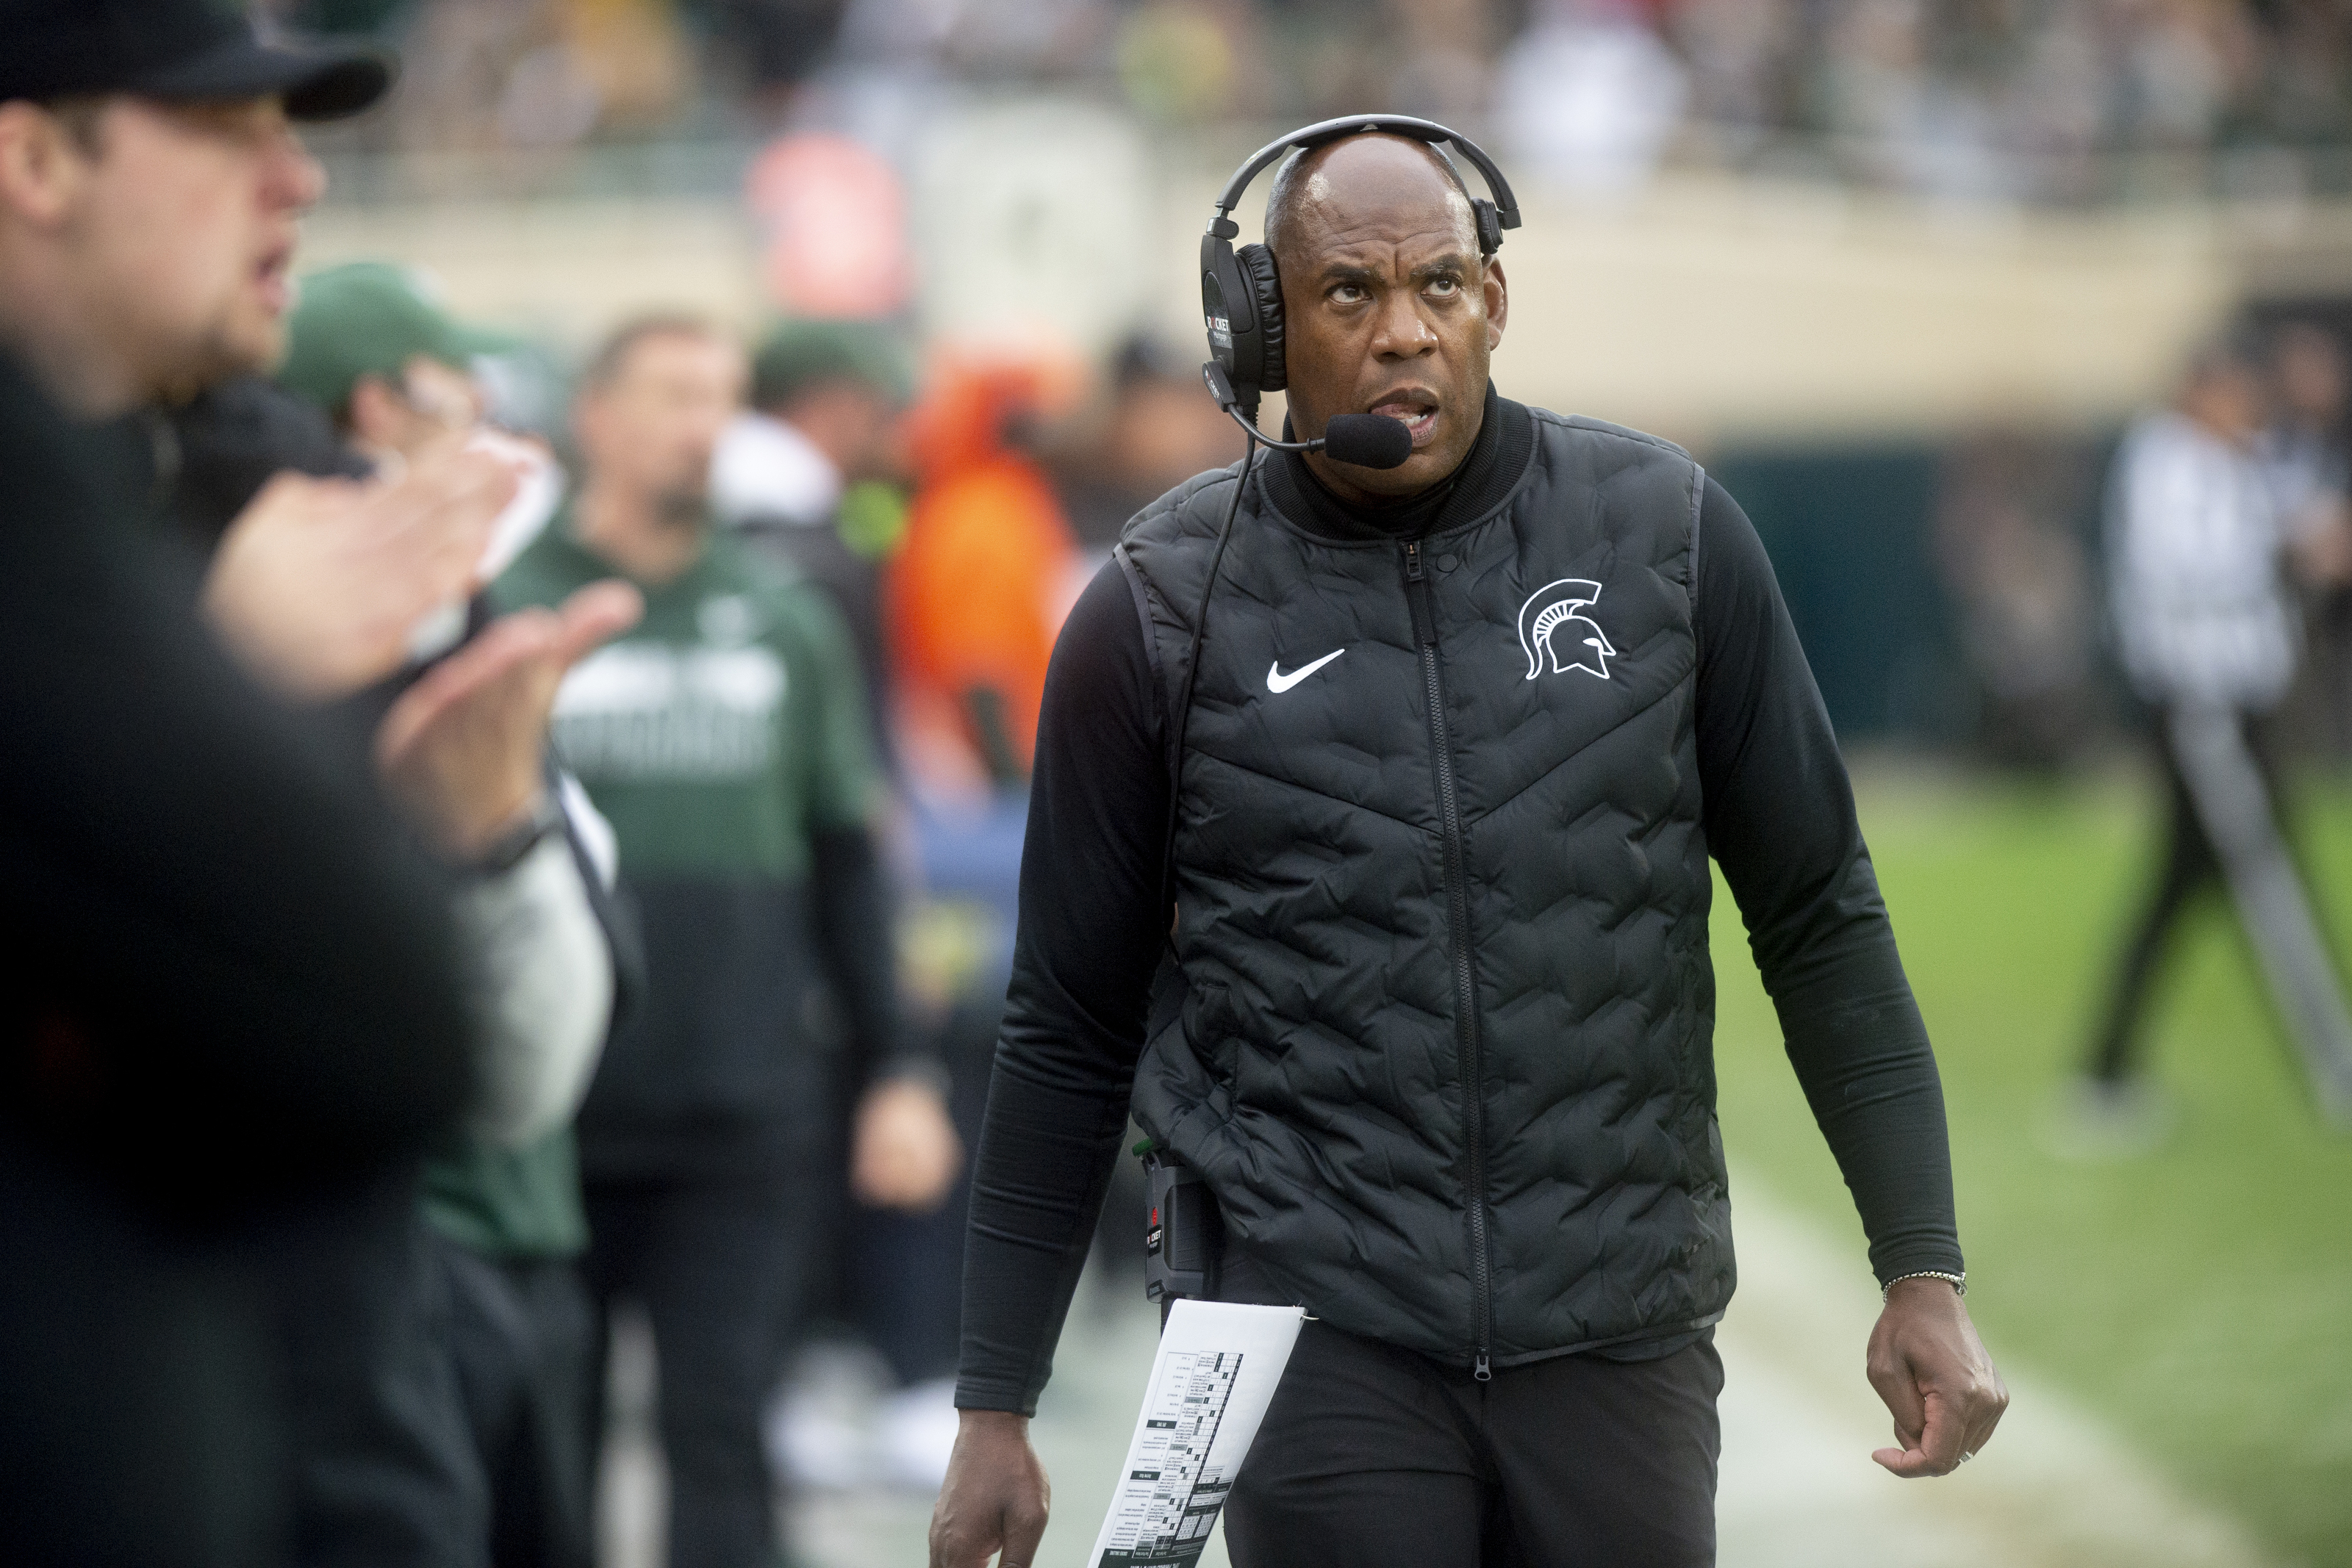 Msu Football 2022 Schedule Takeaways From Michigan State Football's New 2022 Schedule - Mlive.com